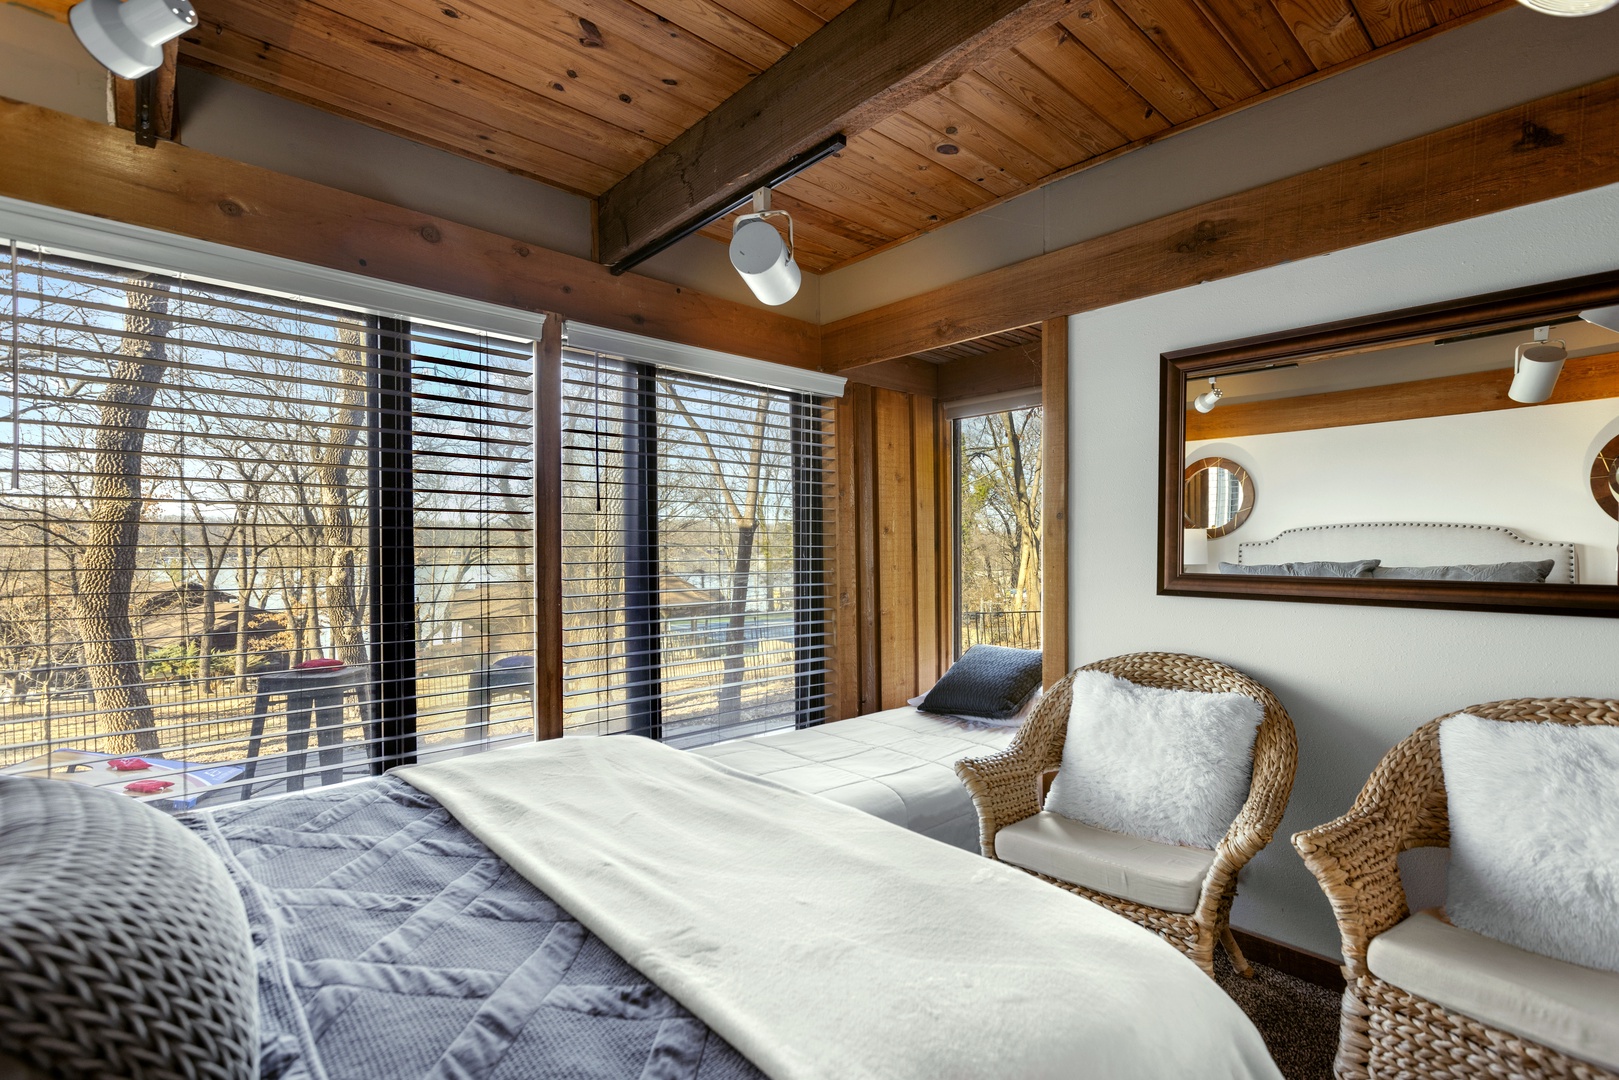 The 1st of 2 bedroom retreats boasting a plush queen bed & twin bed